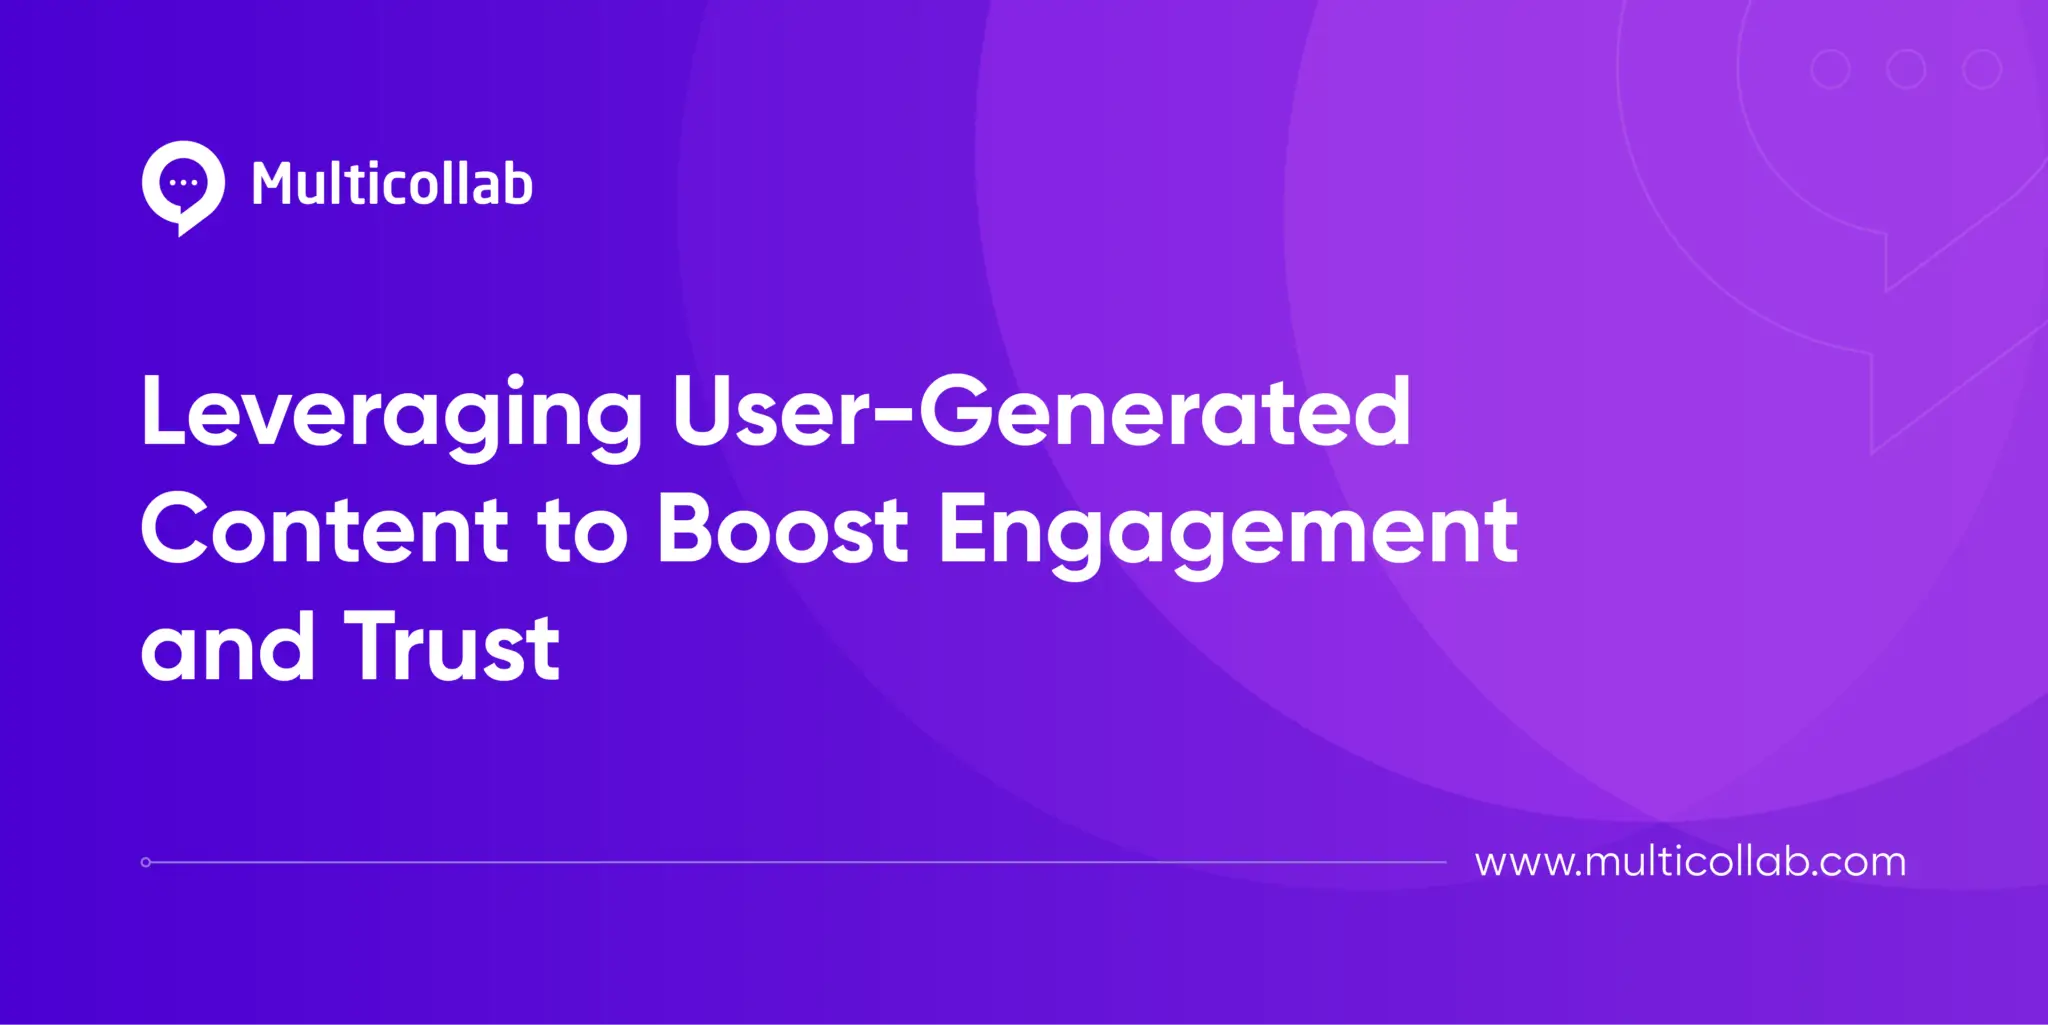 How to Generate and Leverage User-Generated Content to Boost Engagement and Trust